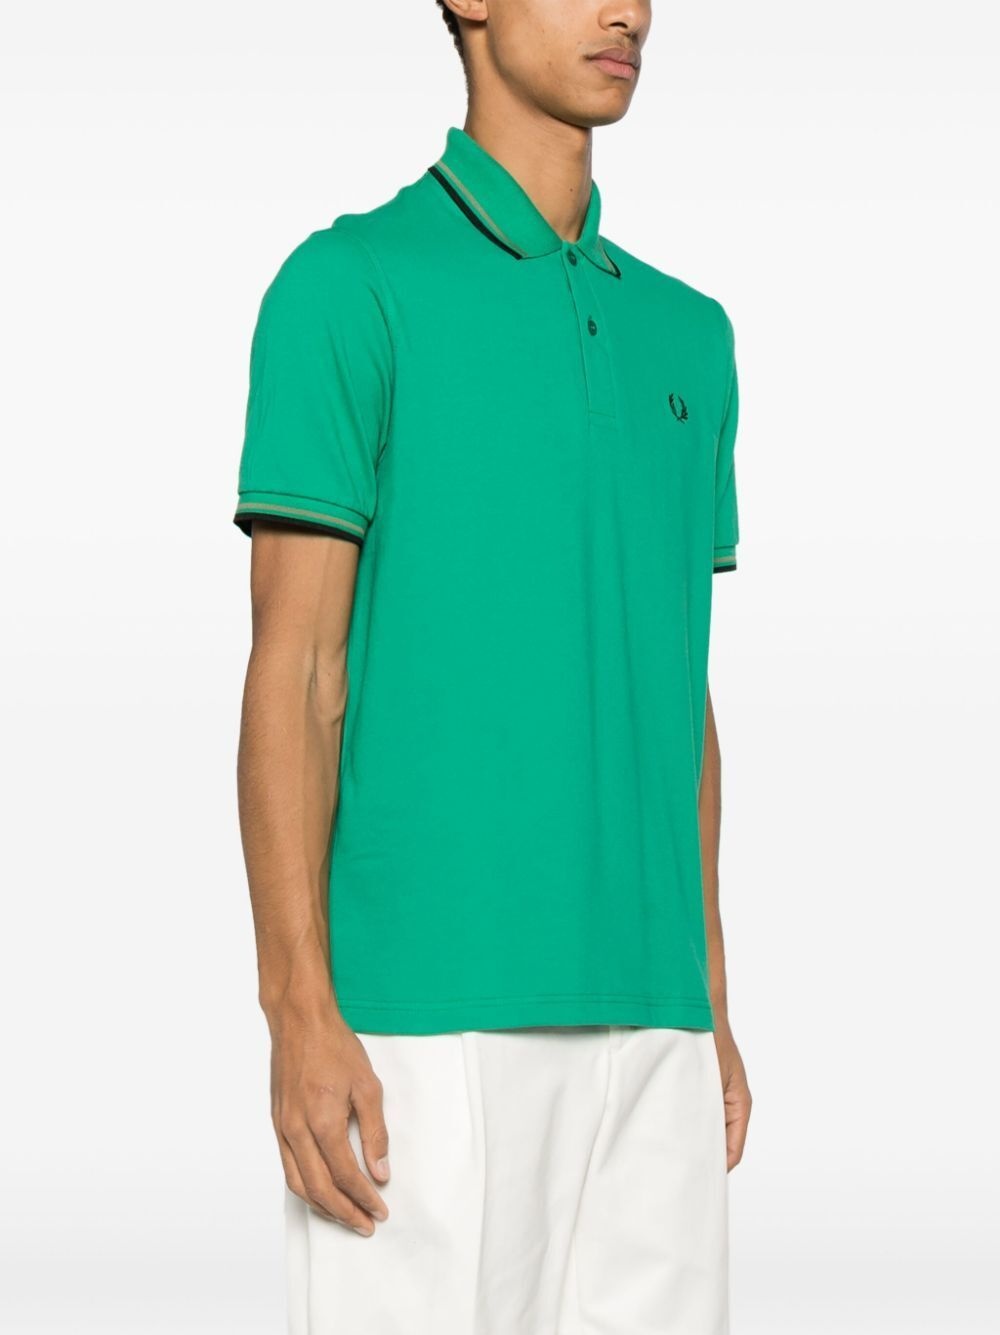 FP TWIN TIPPED FRED PERRY SHIRT - 5